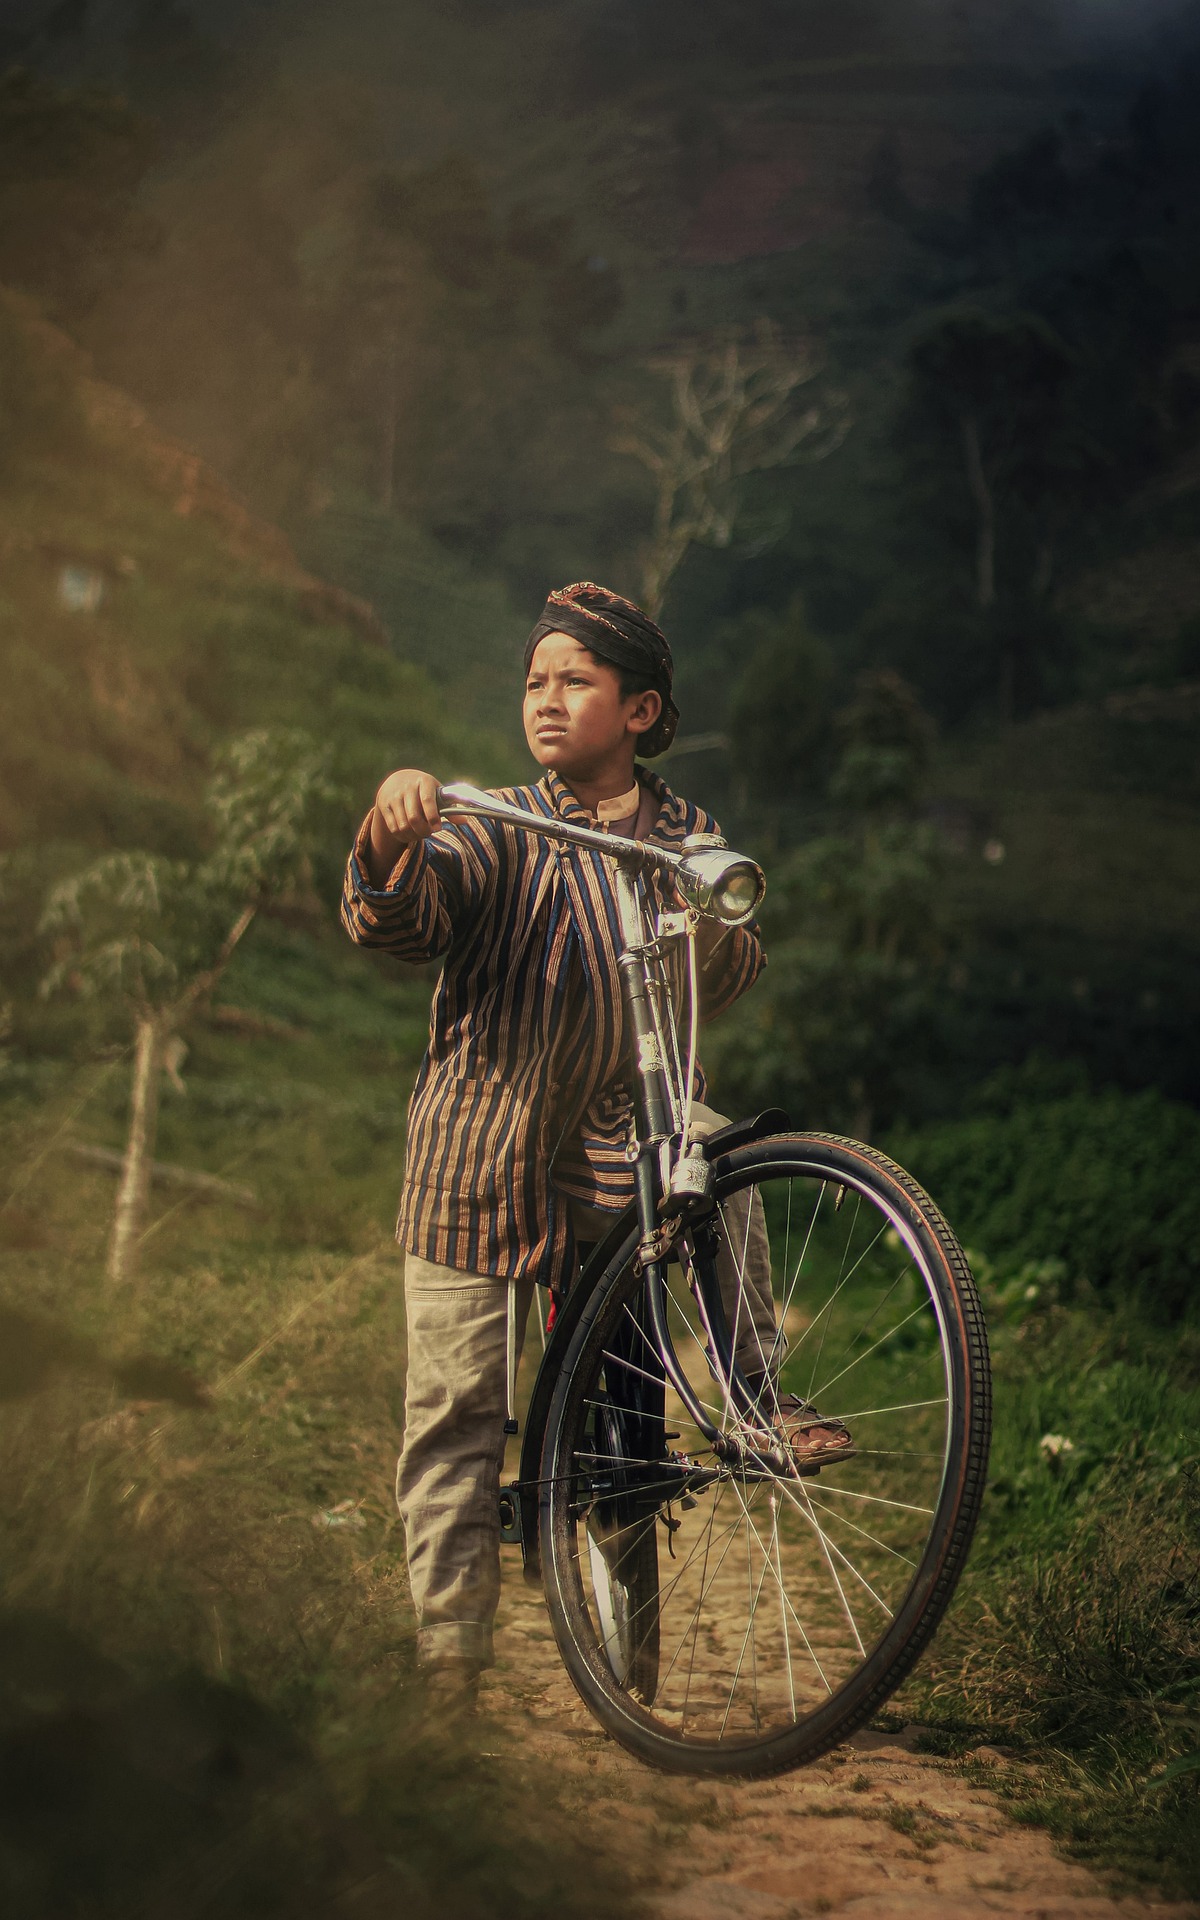 The boy gave his bicycle to his master to try to ride it